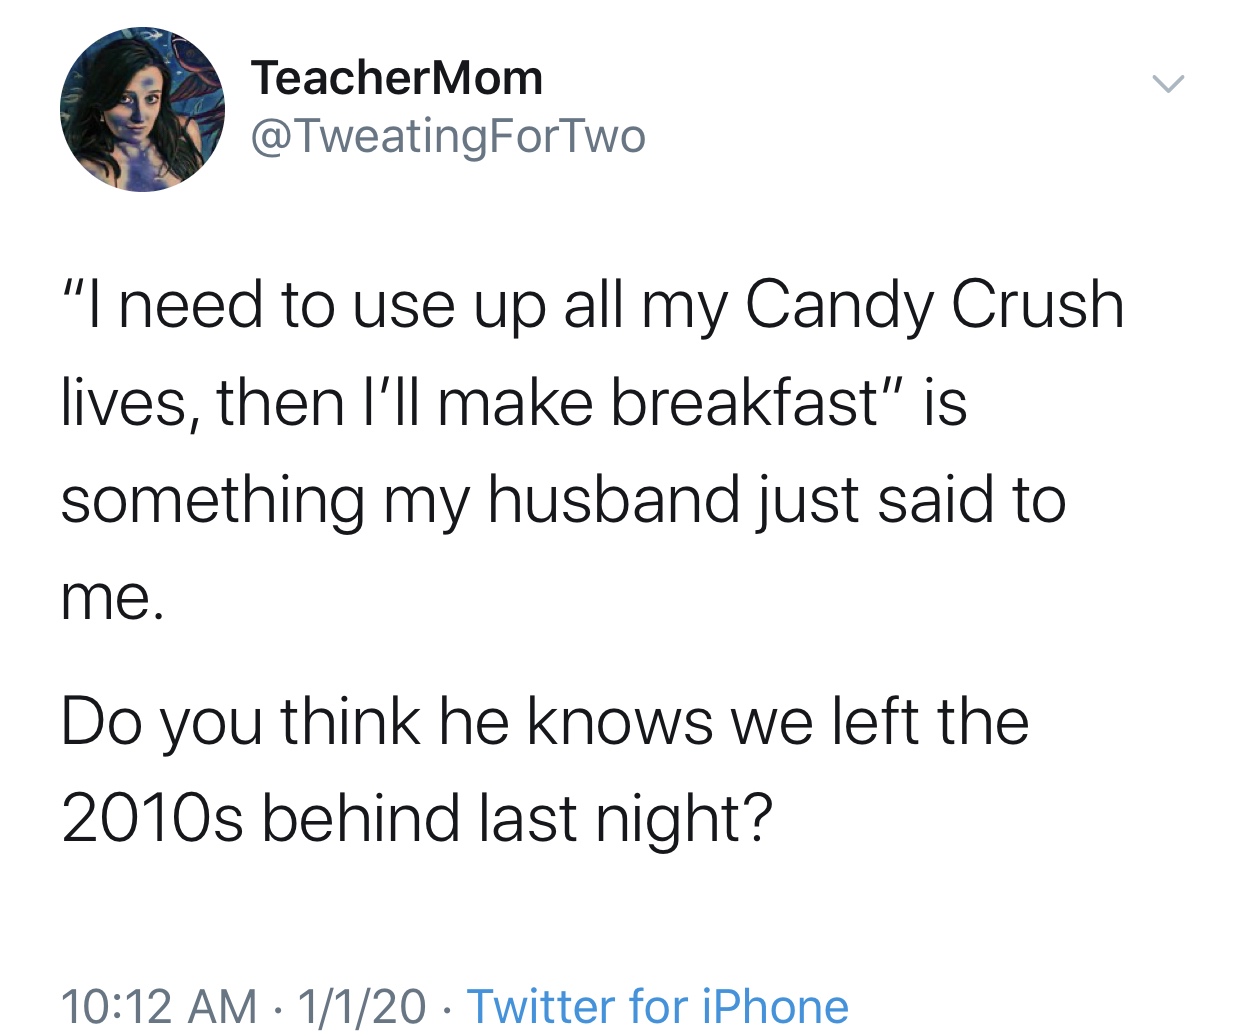 angle - TeacherMom "I need to use up all my Candy Crush lives, then I'll make breakfast" is something my husband just said to me. Do you think he knows we left the 2010s behind last night? 1120 Twitter for iPhone